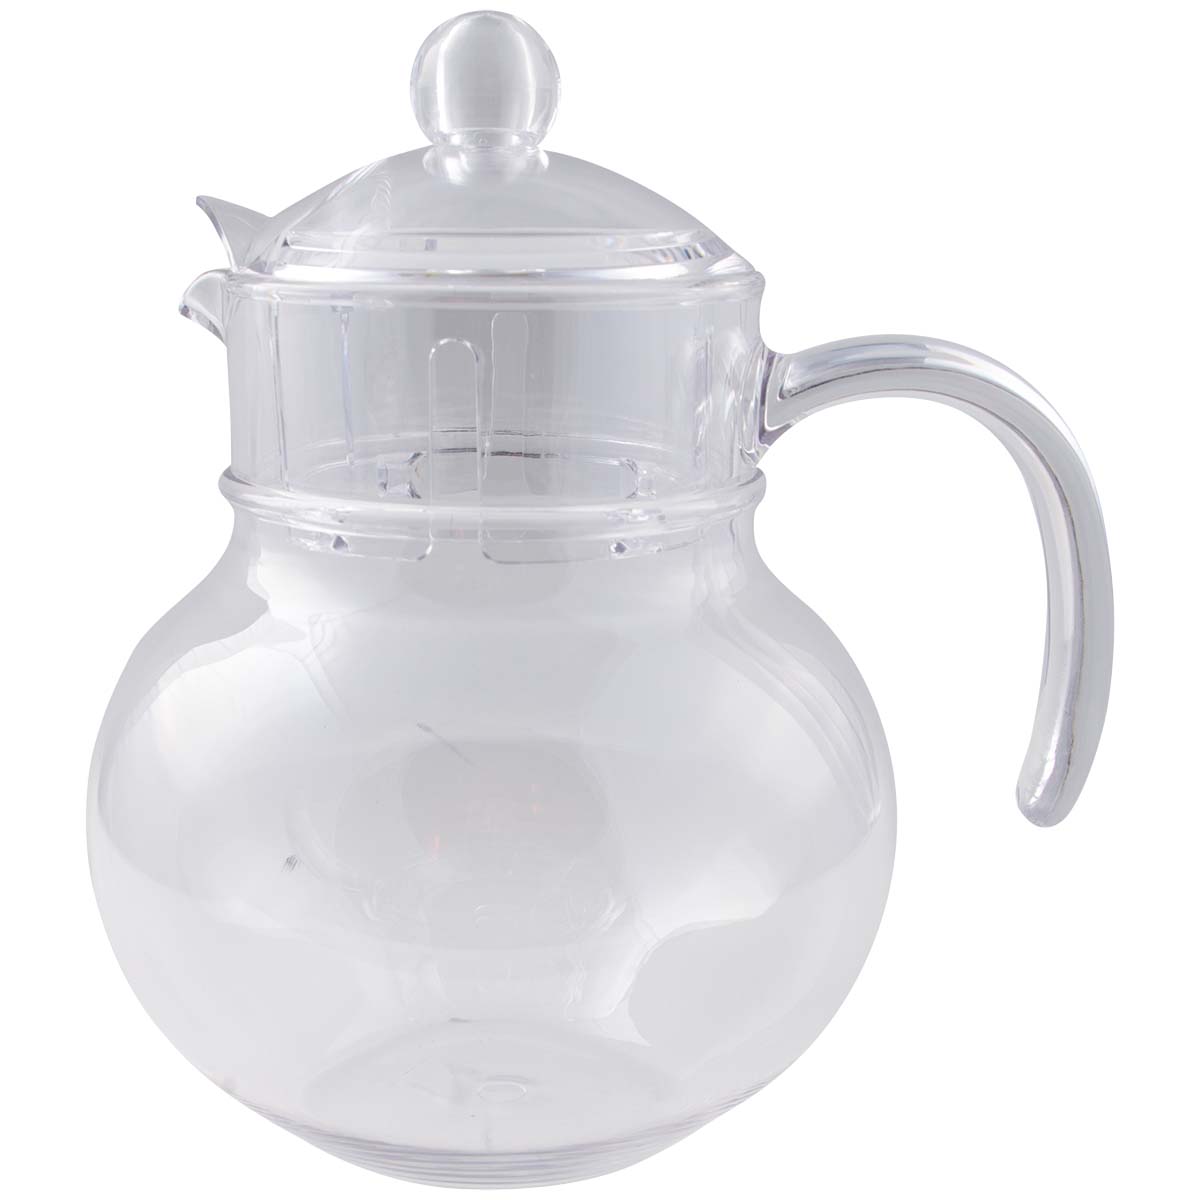 6101390 A very strong and virtually unbreakable teapot. Made of 100% polycarbonate. The teapot is very lightweight and the handle does not get hot. The teapot also pours without dripping.